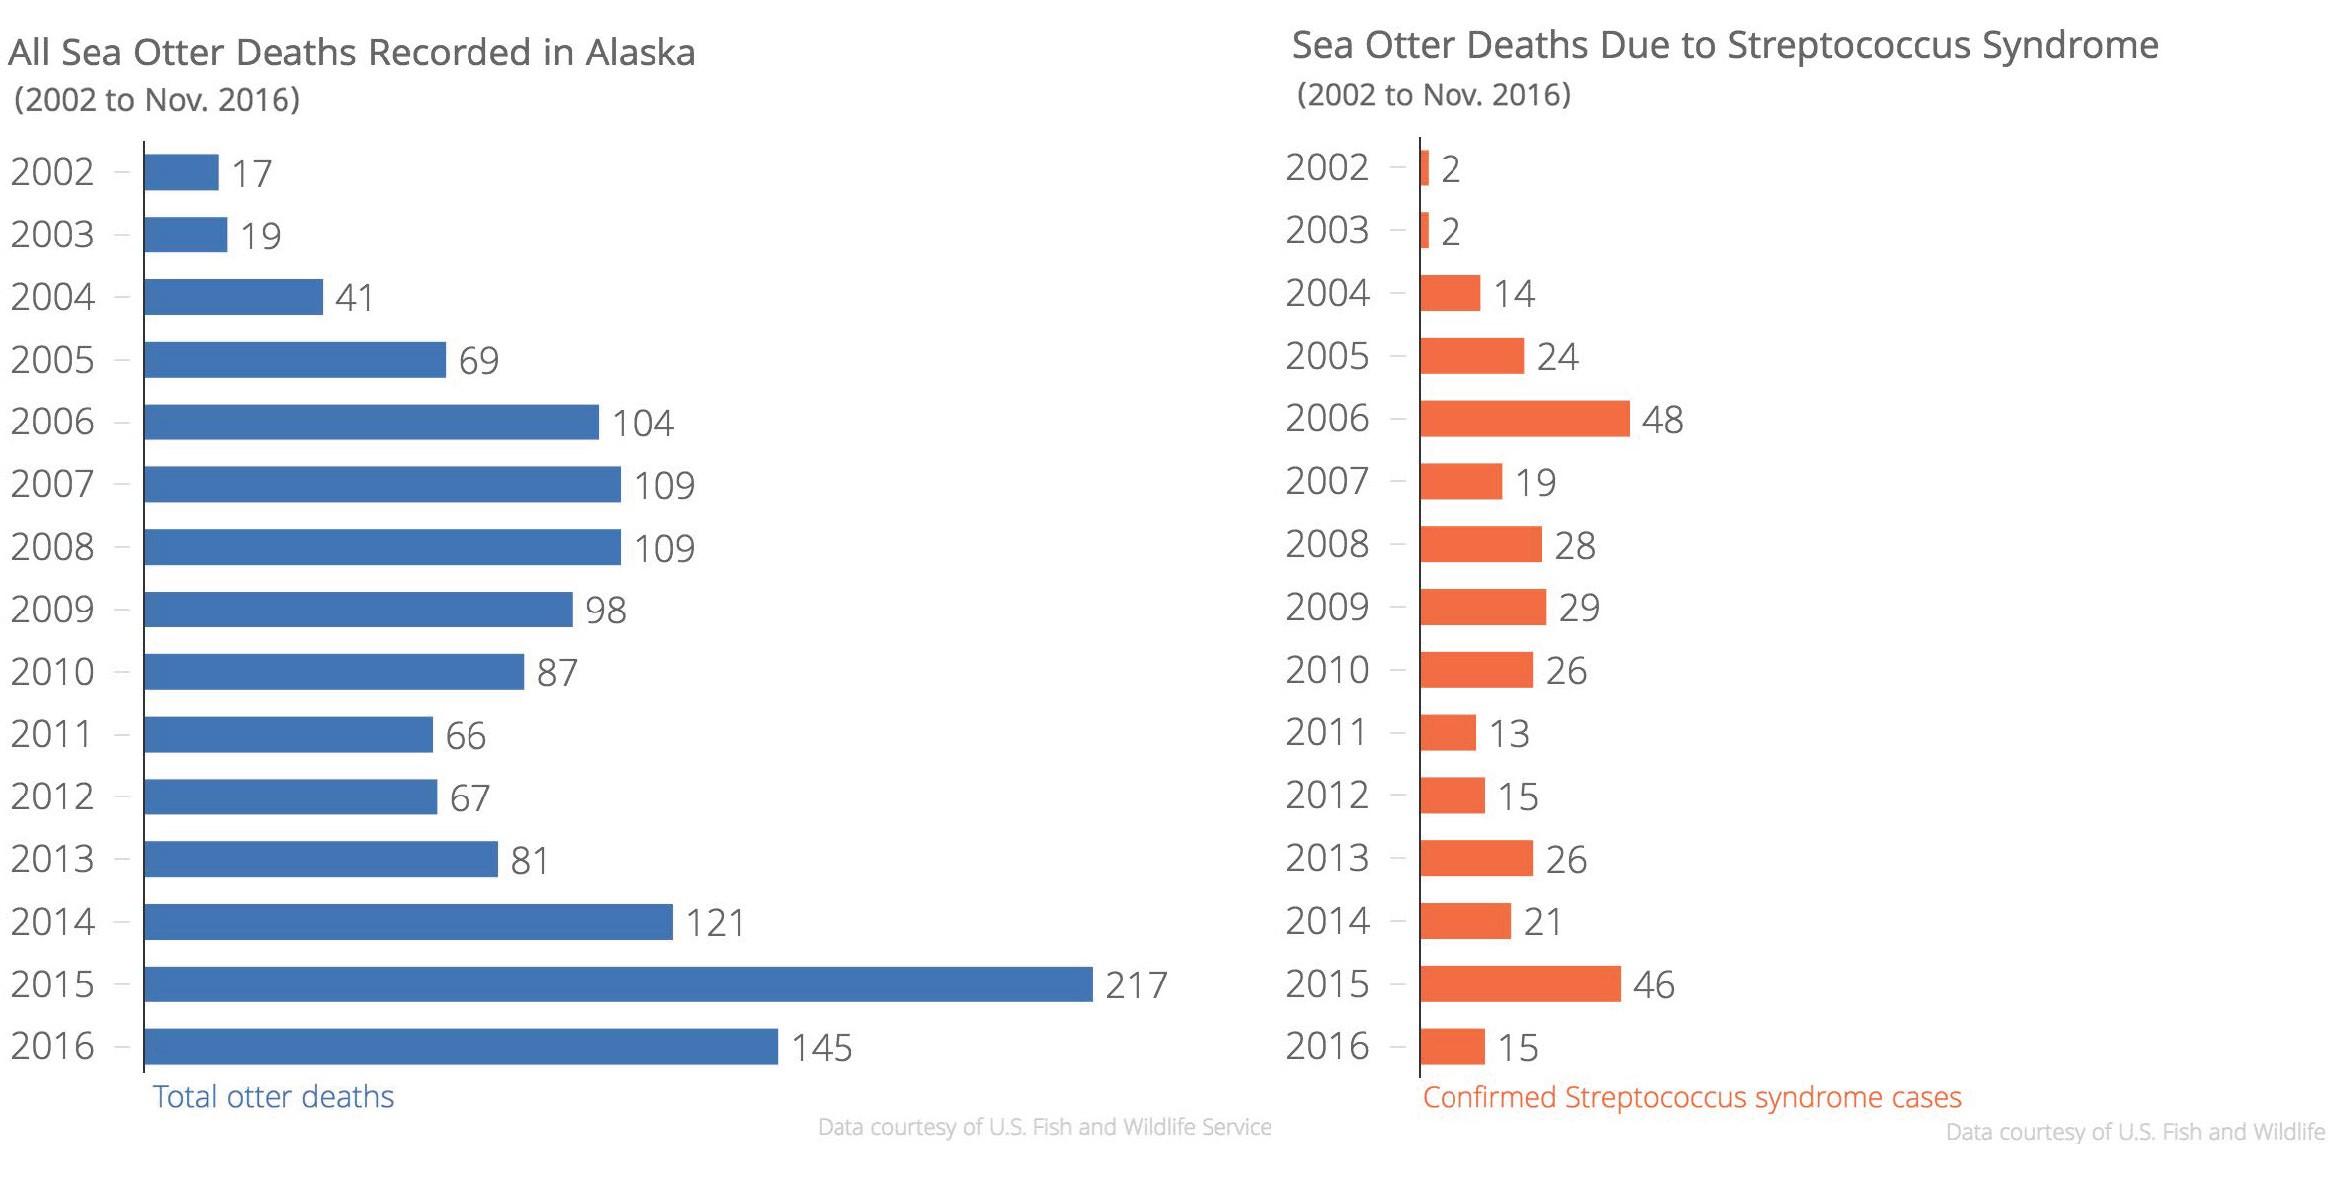 Total sea otter deaths recorded in Alaska from 2002 to November 11, 2016 (left) and sea otter deaths directly attributed to Streptococcus syndrome during the same time period (right). According to the U.S. Fish and Wildlife Service, the data presented depend in large part on the total number of dead sea otters collected and examined. Because only a fraction of sea otter carcasses are recorded or examined, the data are likely an underestimate of the total number of dead otters and otters who died due to Streptococcus infection. Data courtesy of the U.S. Fish and Wildlife Service. (Graphic by Shahla Farzan/KBBI)